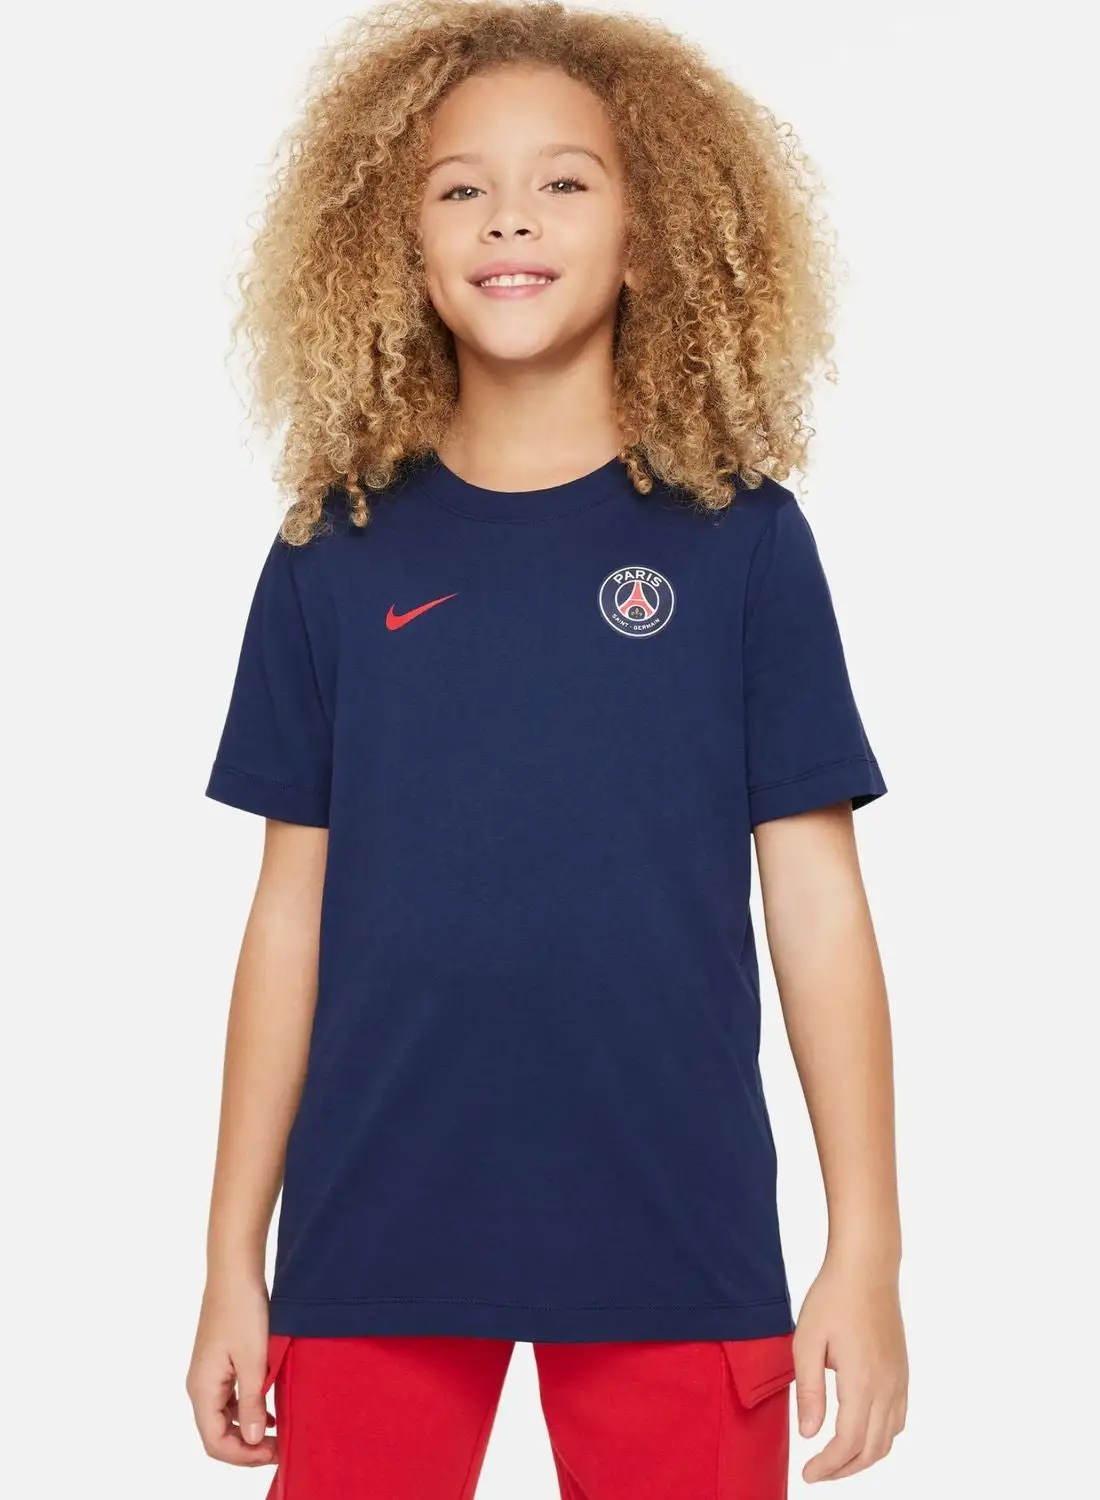 Nike Youth Psg Number 10 T-Shirt